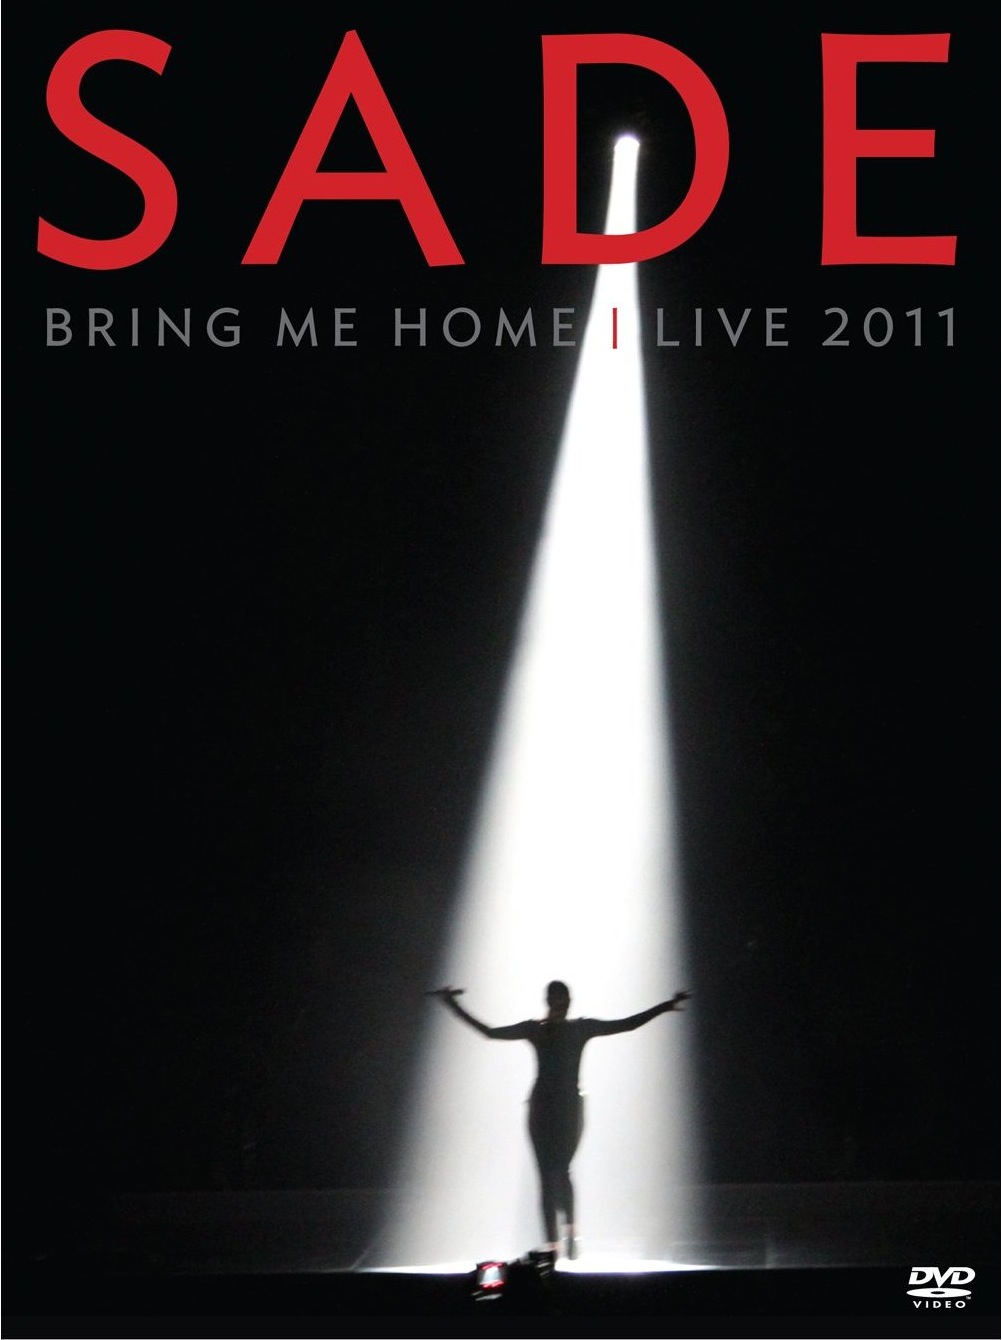 News Added Apr 13, 2012 Hailed as “the best concert of the year” by the Baltimore Sun, Sade will release her live DVD/CD and Blu-ray for, “Bring Me Home – Live 2011” on May 22nd. In 2011, after a 10 year hiatus, Sade returned to the U.S. for a 54-date tour in support of the […]